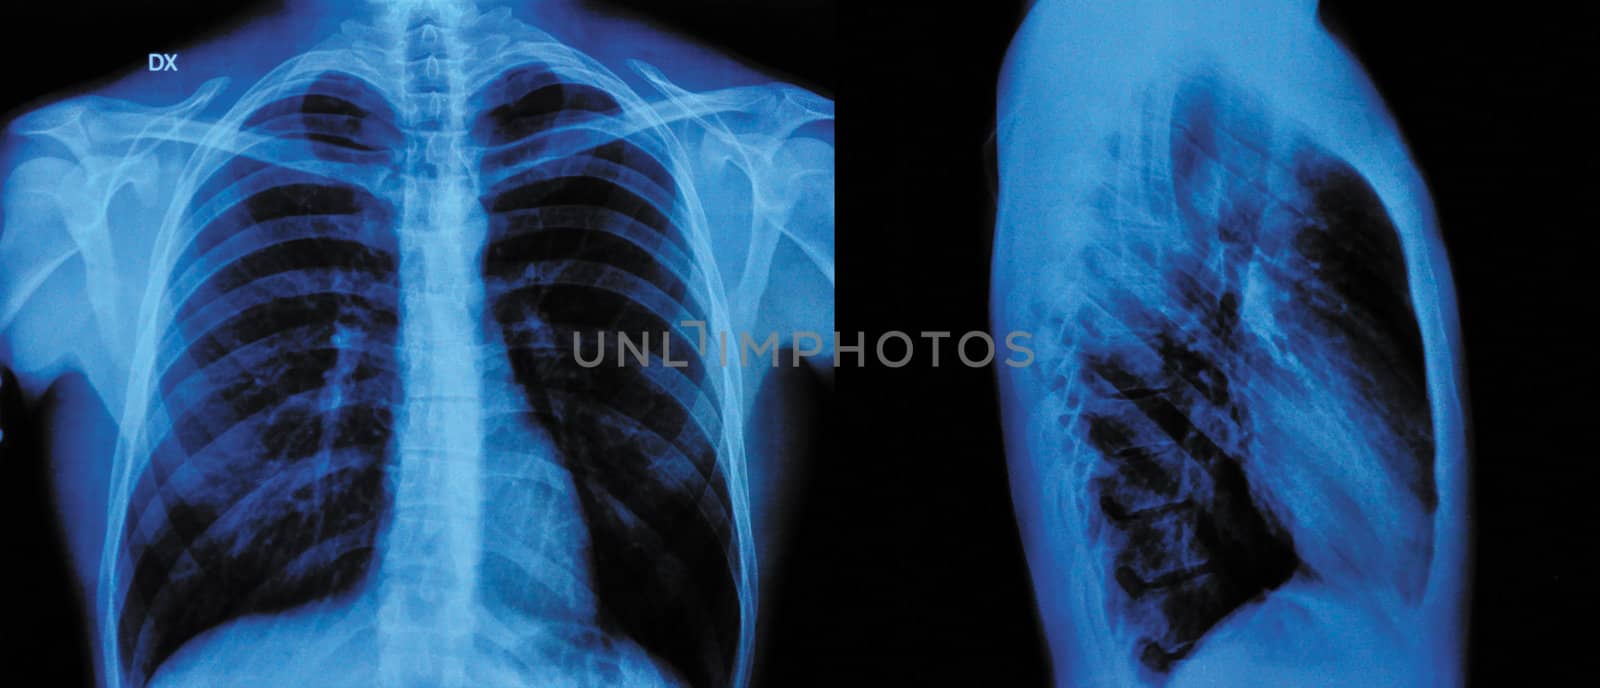 X-Ray Image Of Human Chest front view and lateral view